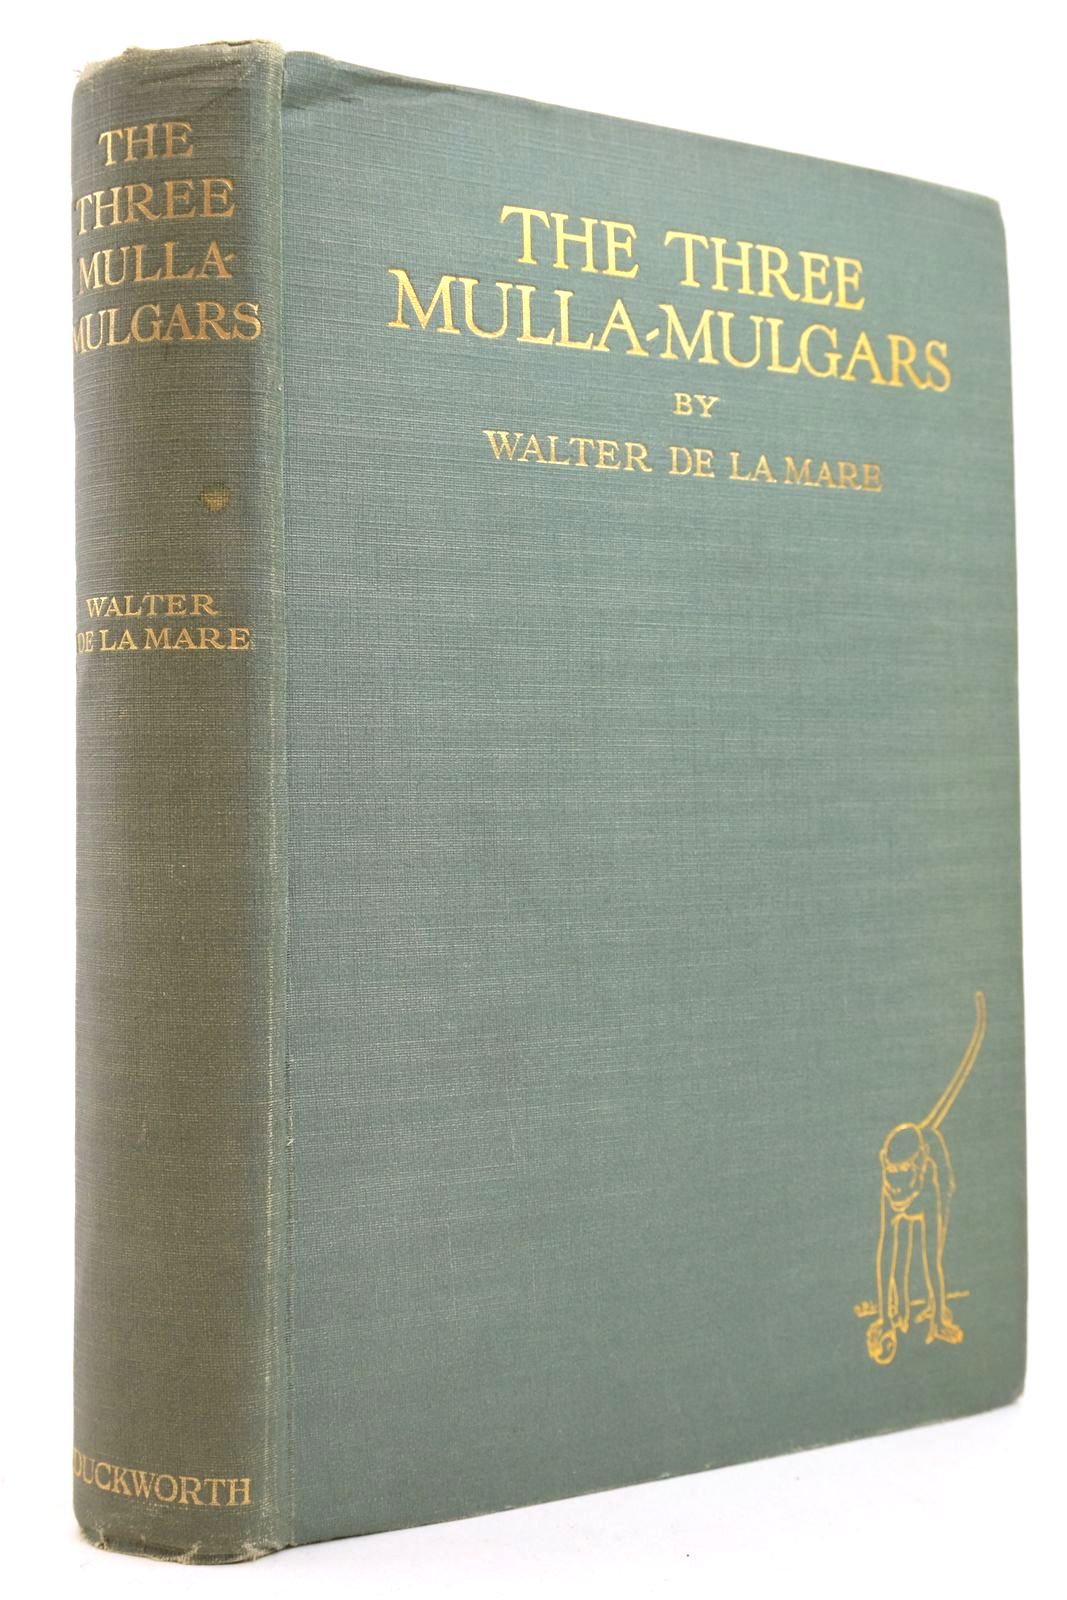 Photo of THE THREE MULLA-MULGARS written by De La Mare, Walter illustrated by Lathrop, Dorothy P. published by Duckworth &amp; Co. (STOCK CODE: 2140155)  for sale by Stella & Rose's Books